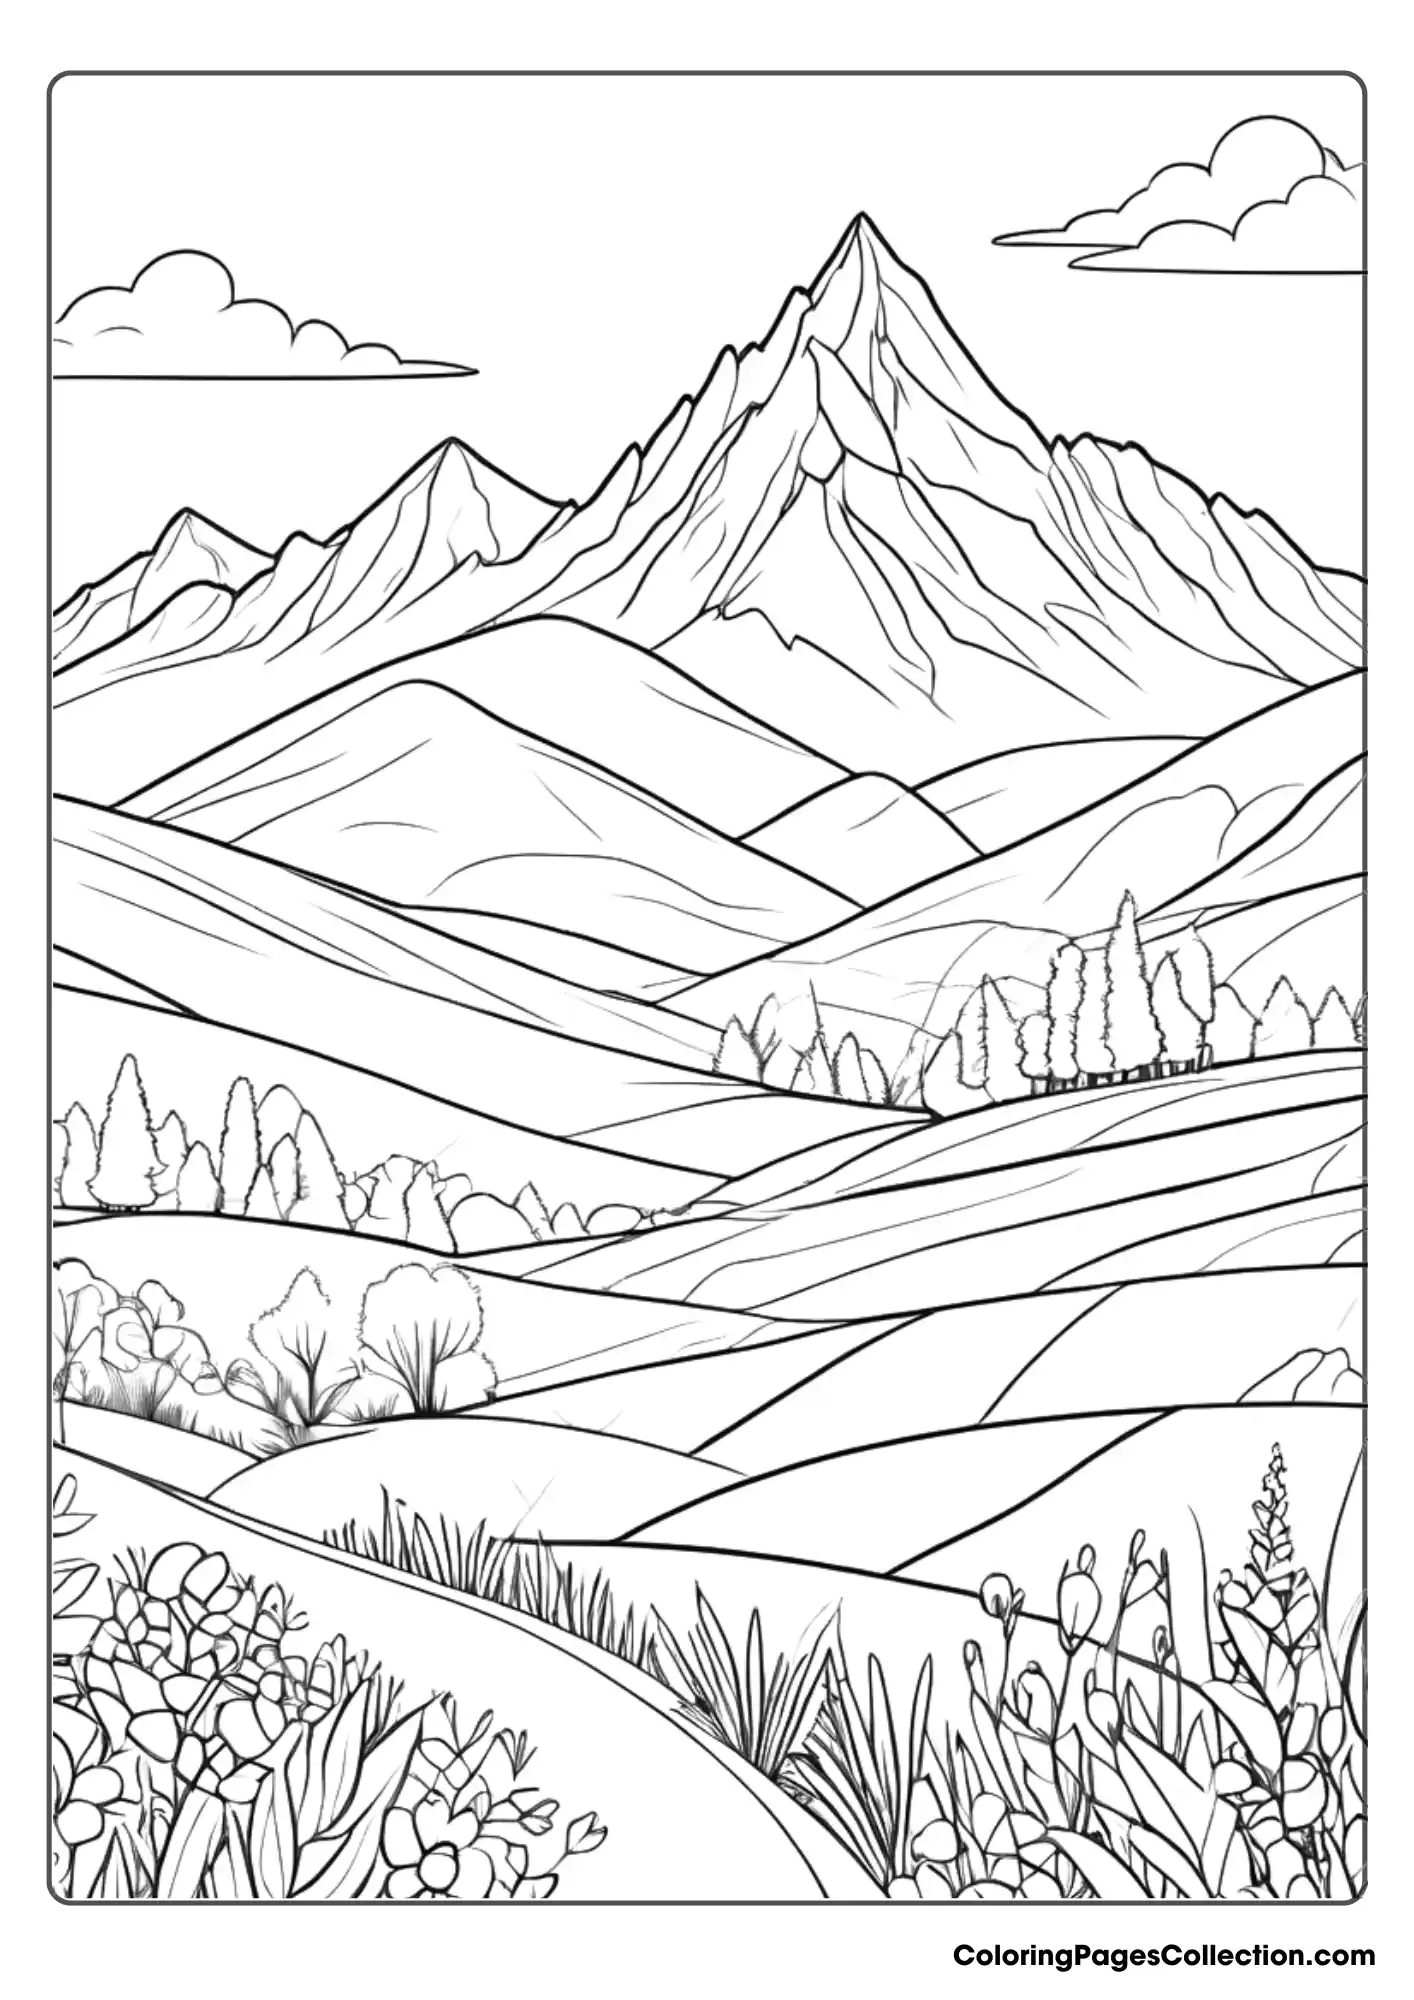 Coloring pages for teens, Nature Coloring Page